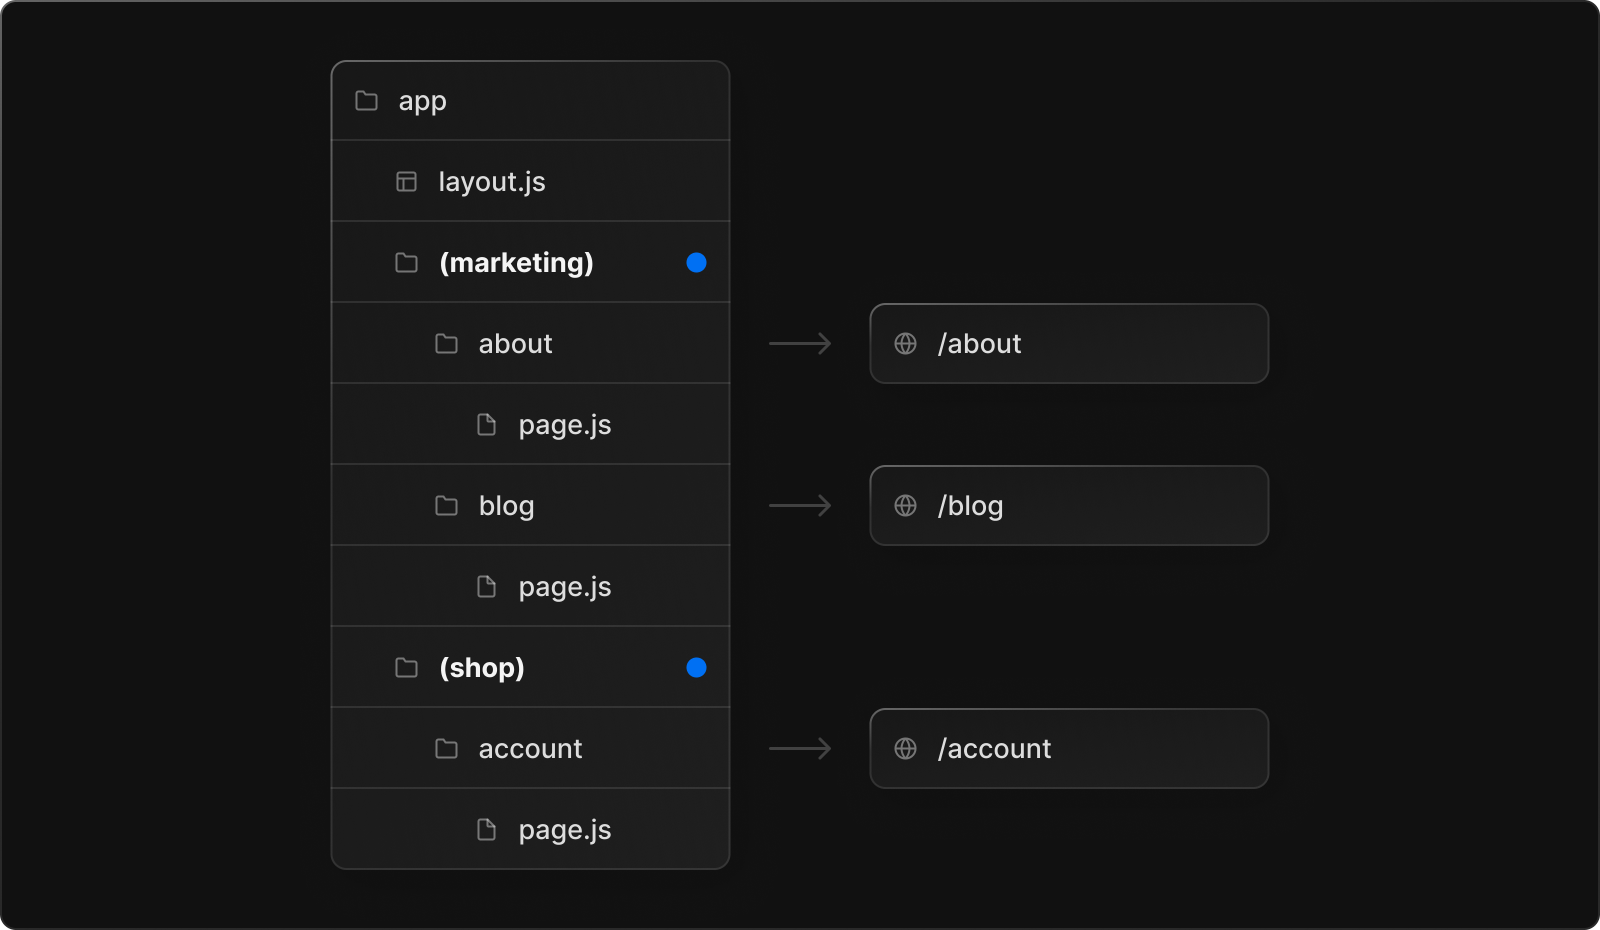 Organizing routes without affecting the URL path